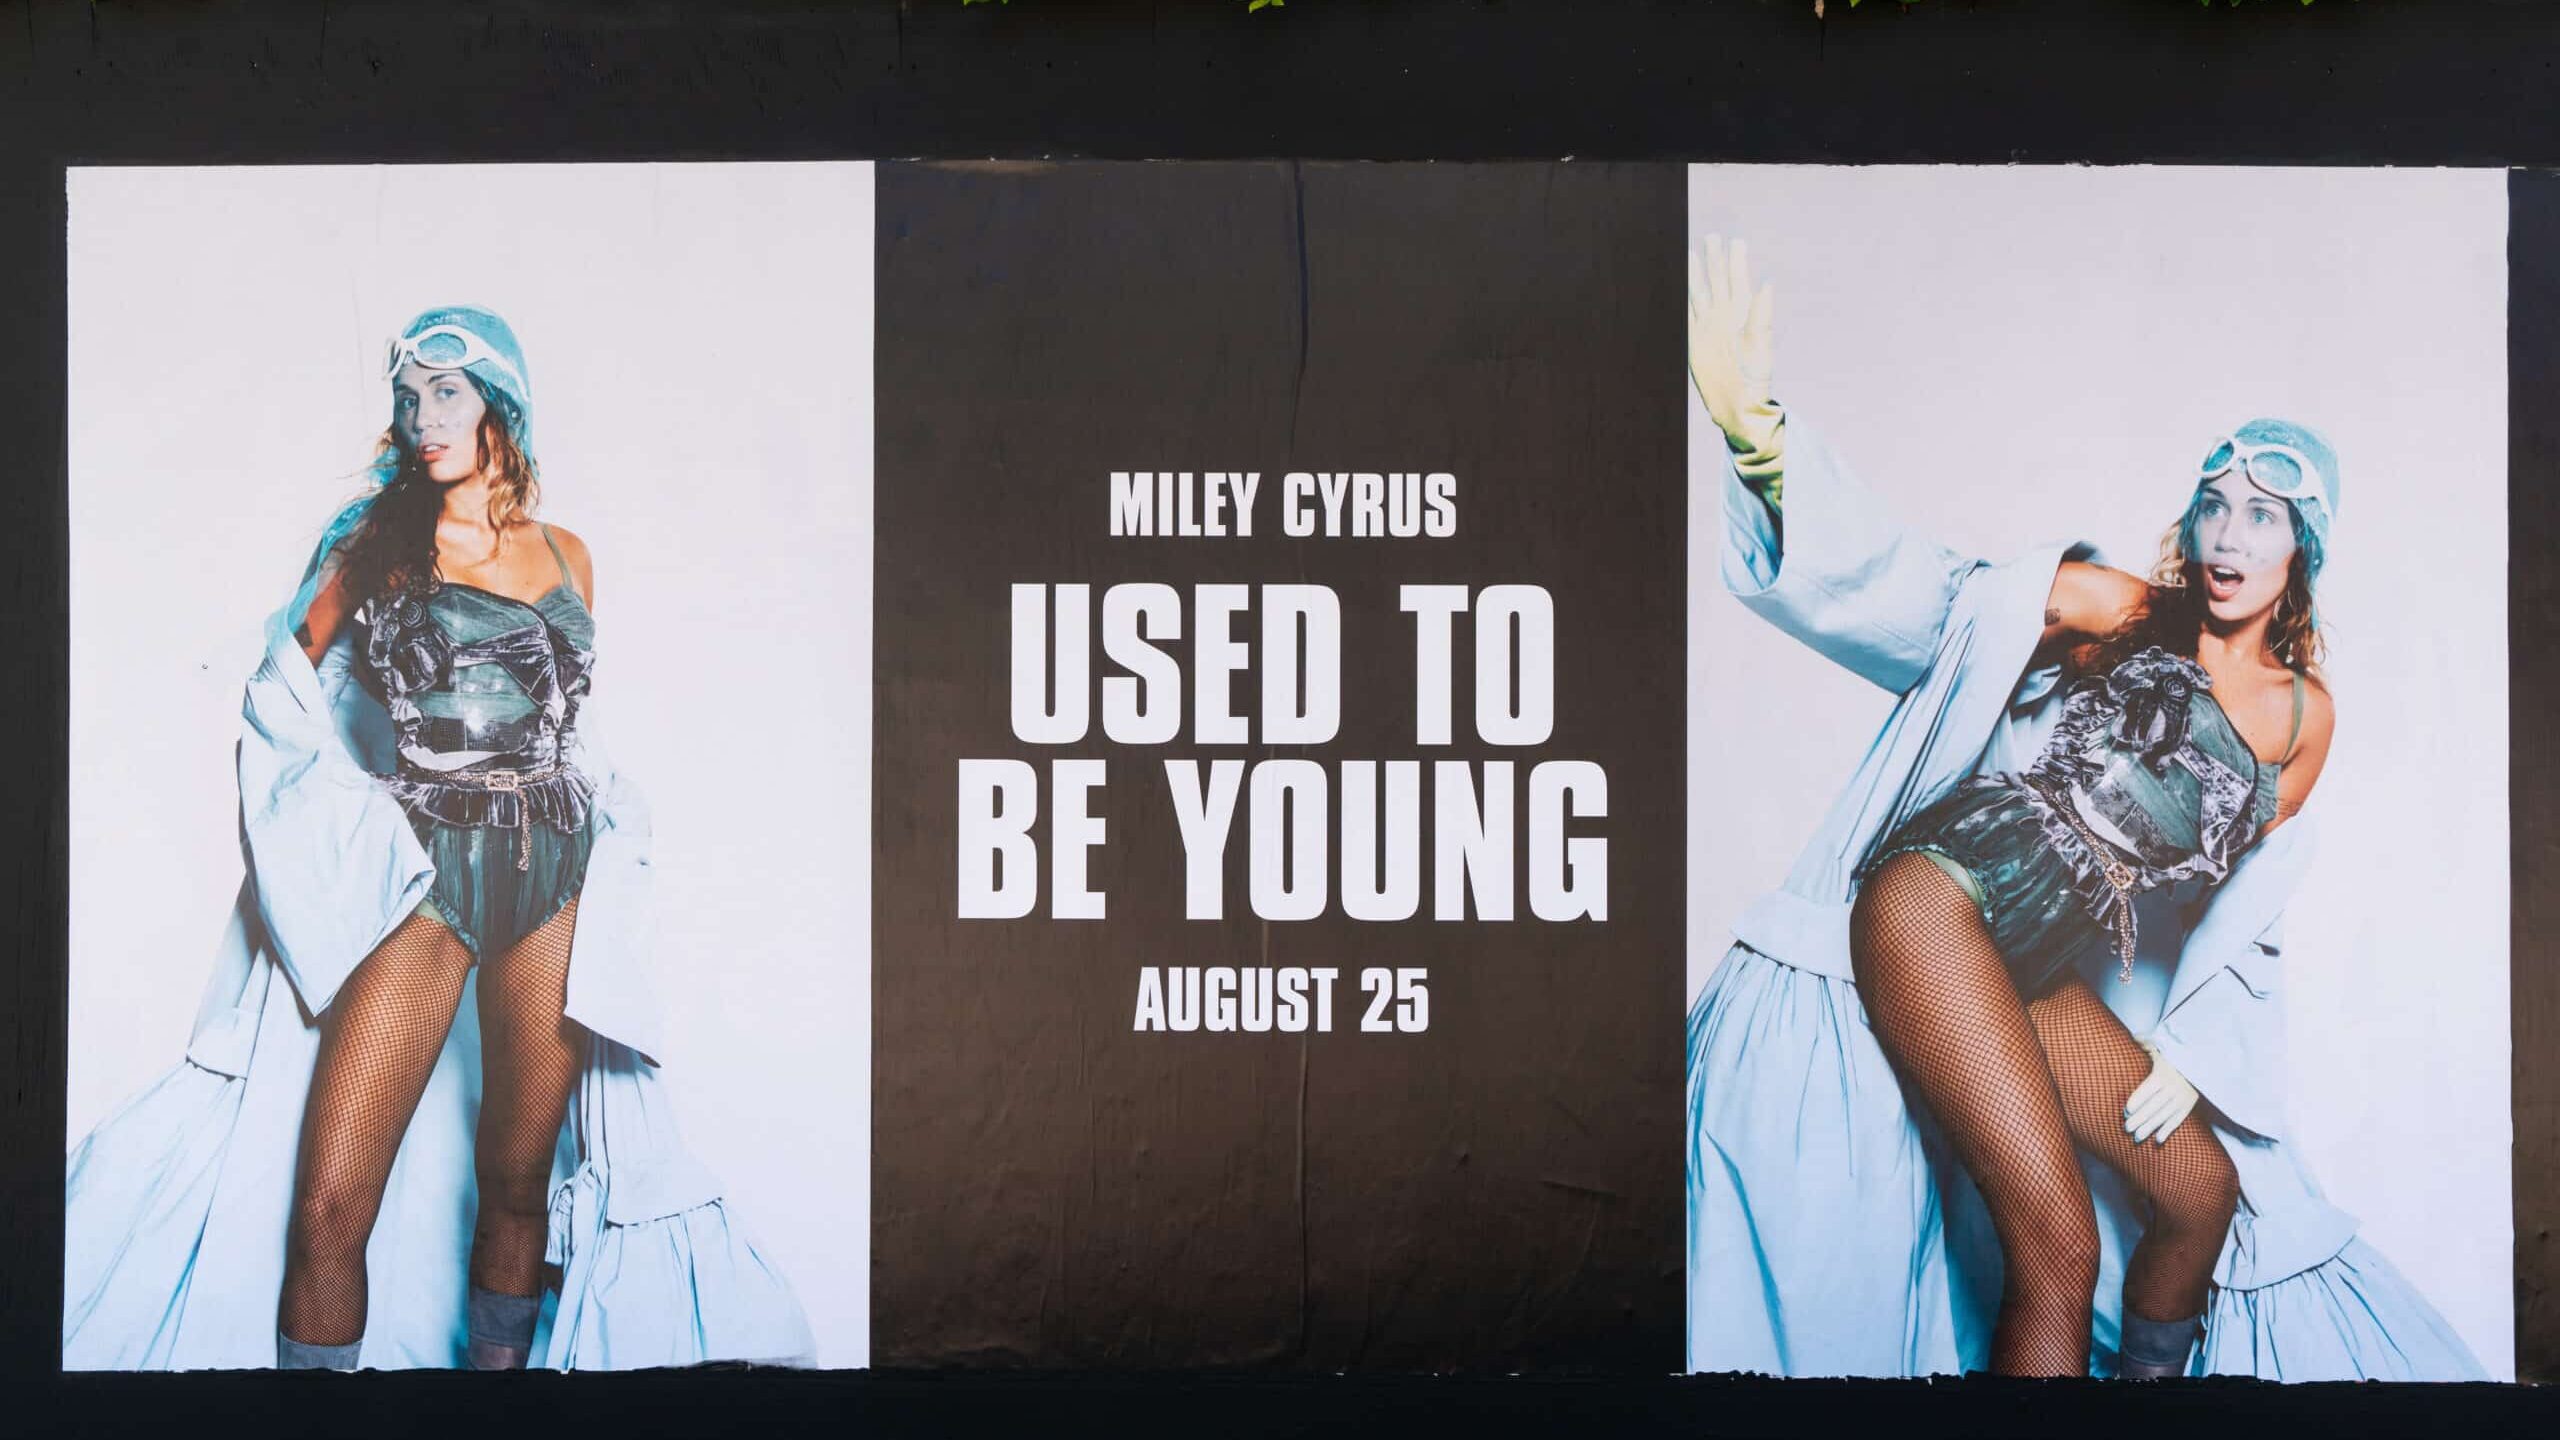 WEST HOLLYWOOD, CA - AUGUST 25: A general view of the Miley Cyrus poster campaign along the Sunset Strip promoting her new single "Used to Be Young" on August 25, 2023 in West Hollywood, California.